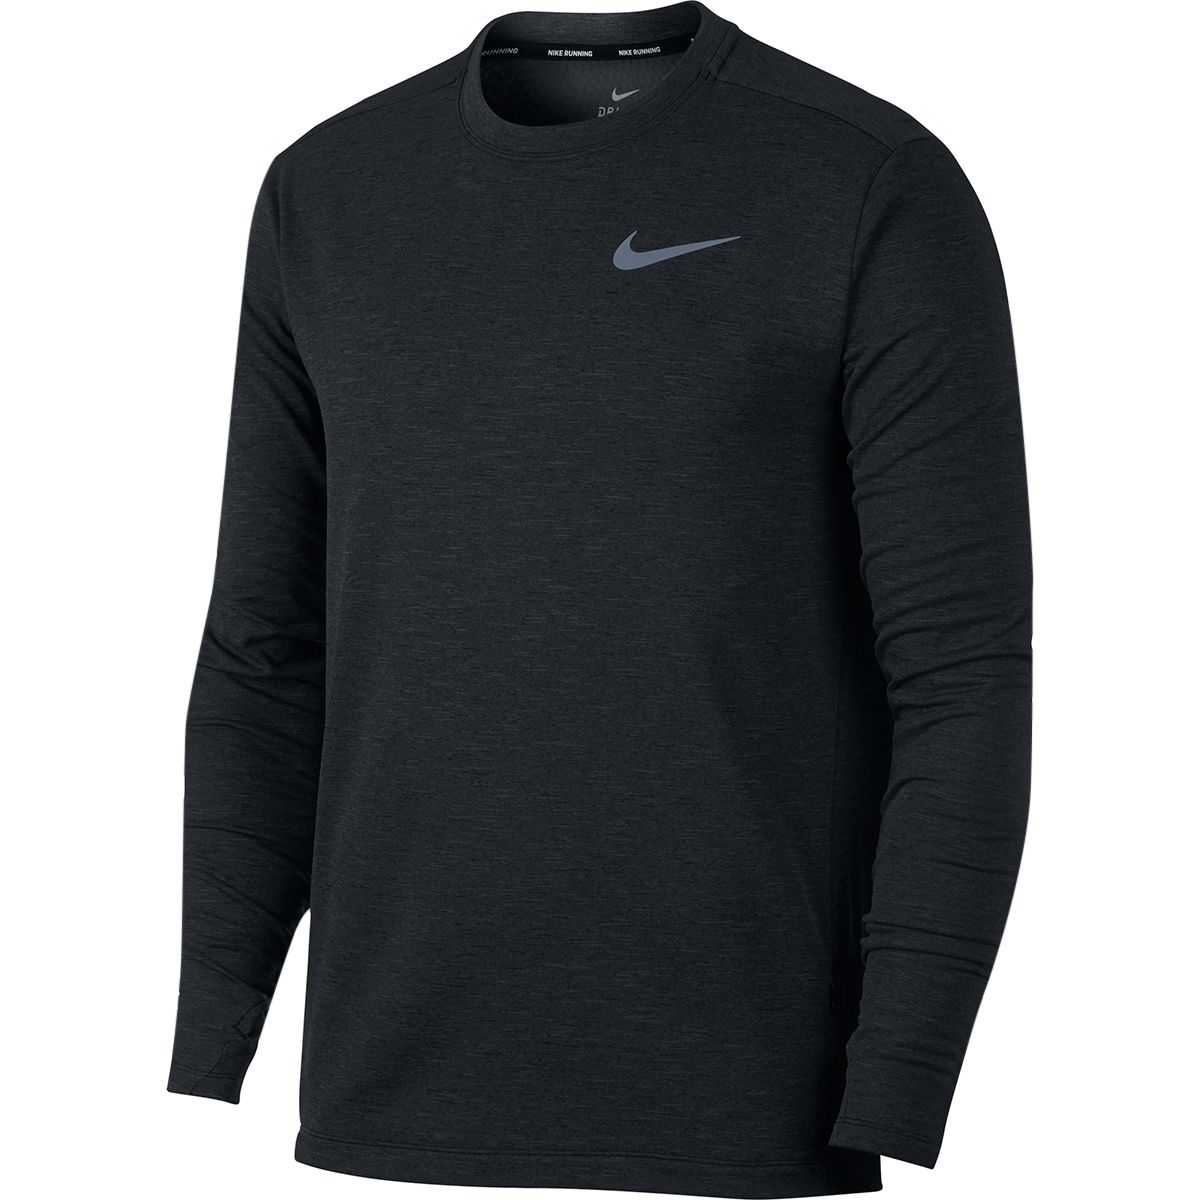 Therma Sphere Element Long-Sleeve 2.0 Top - Men's Clothing